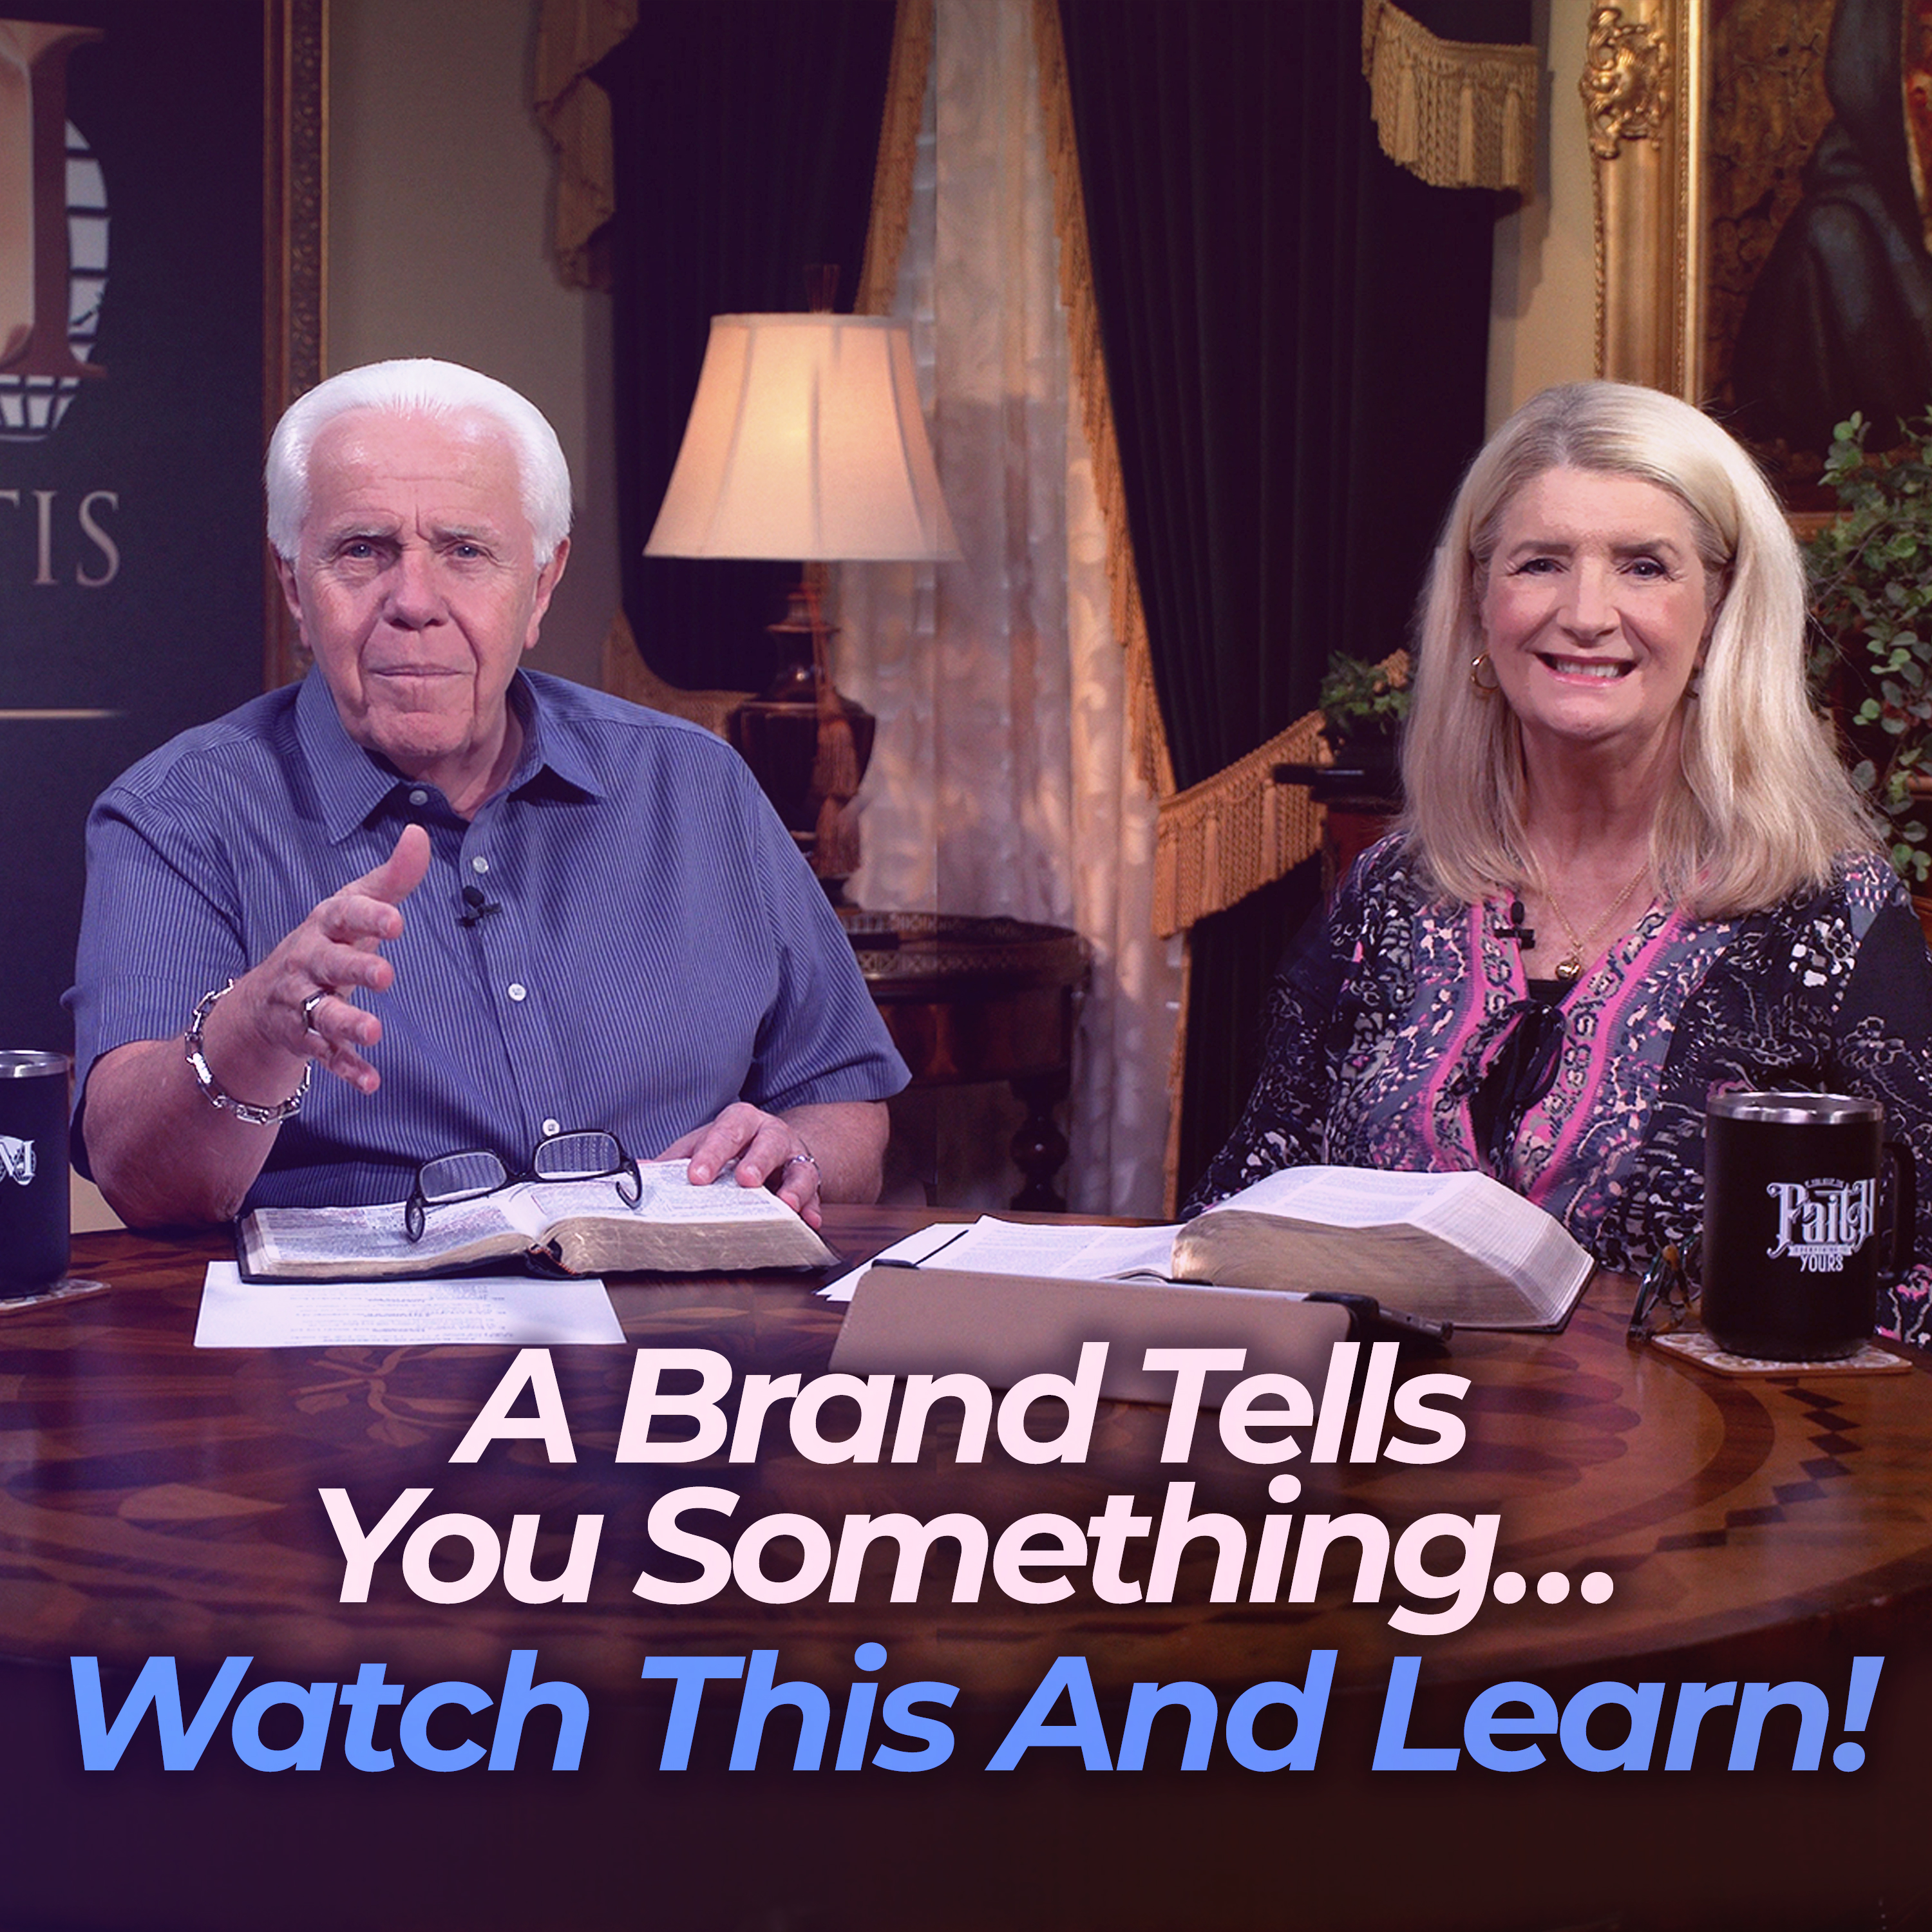 A Brand Tells You Something…Watch This And Learn!